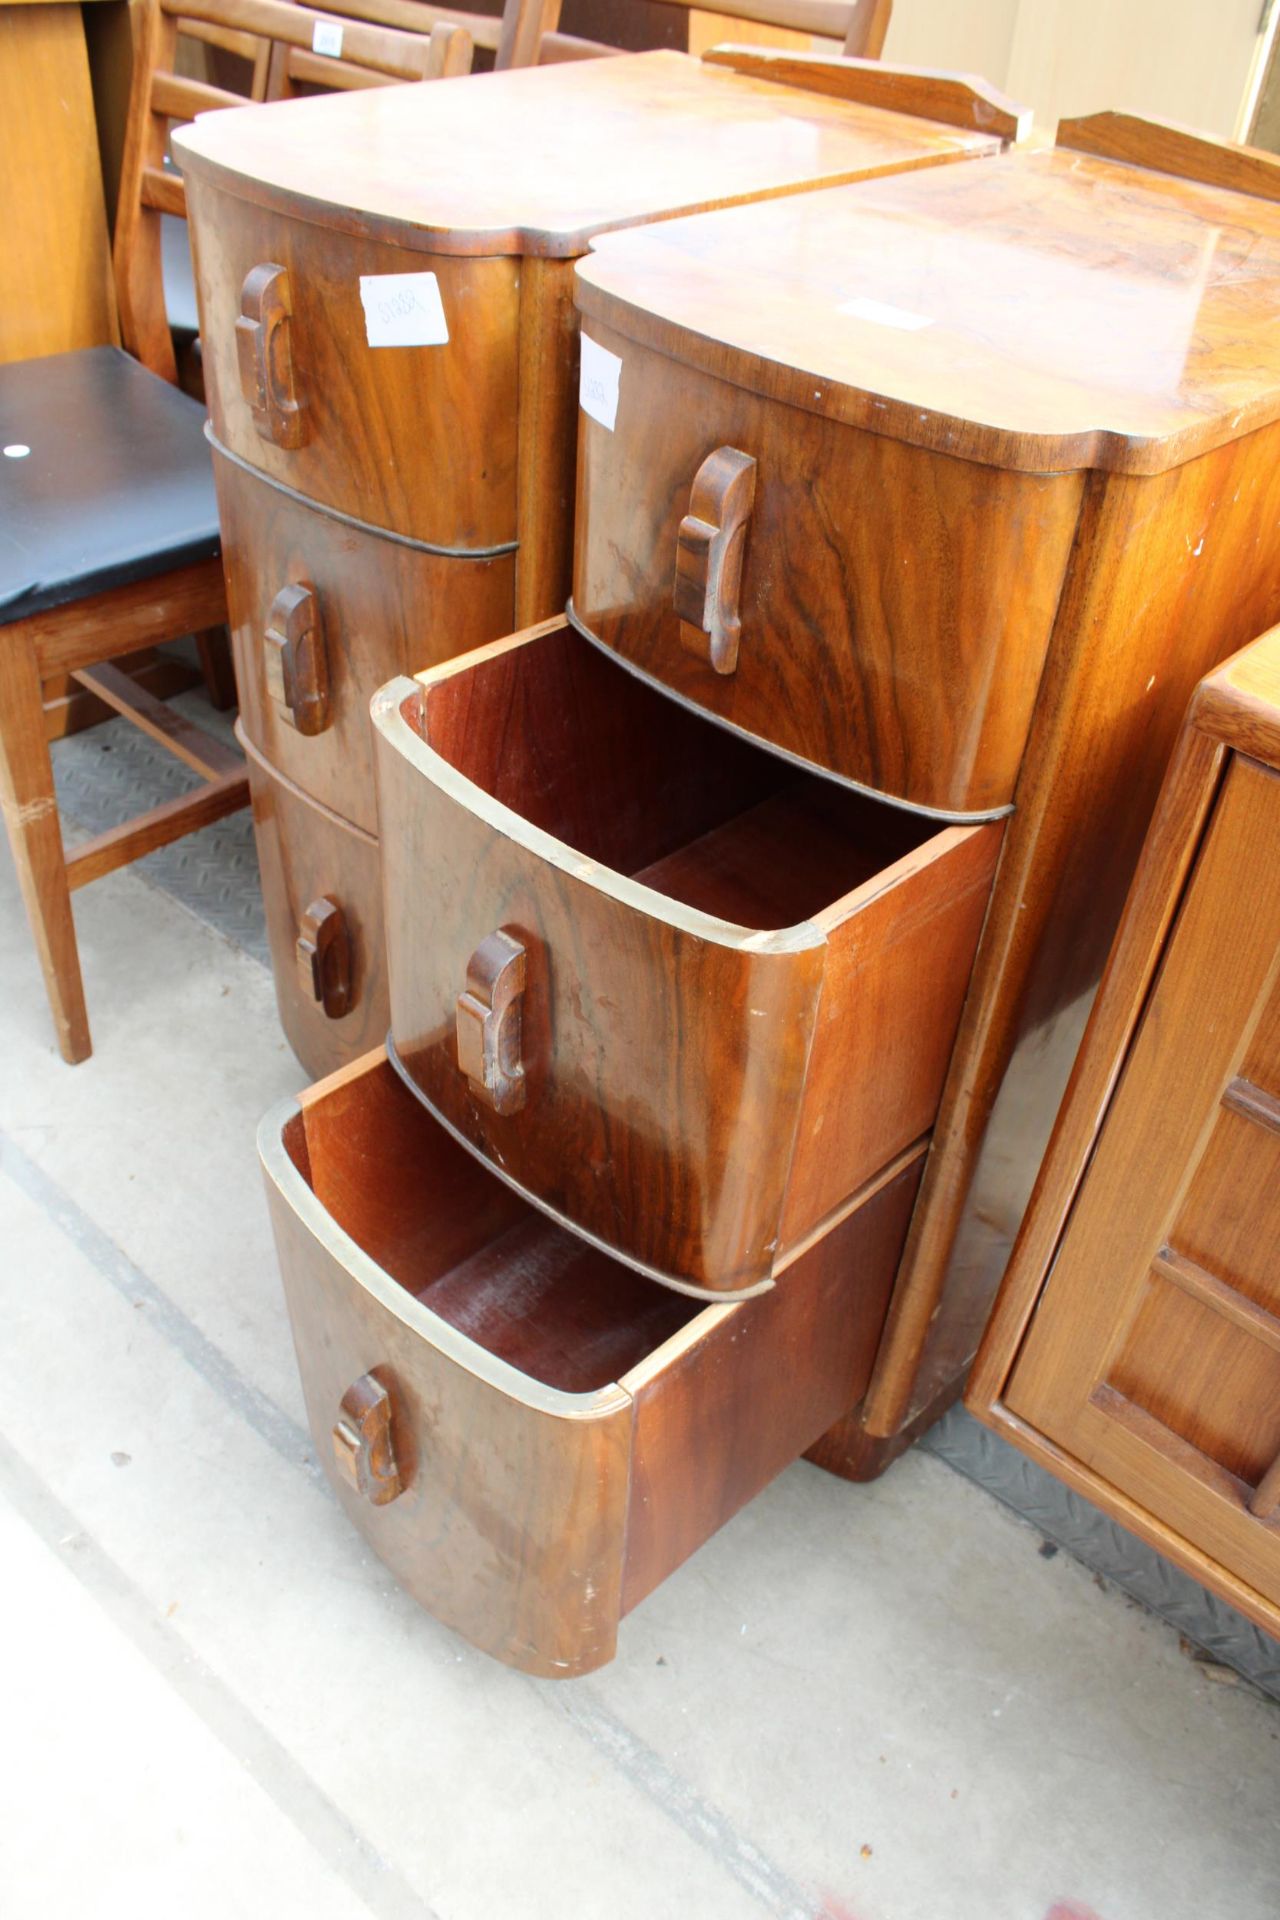 A PAIR OF WALNUT ART DECO THREE DRAWER CHESTS 12.5" WIDE EACH (CUT DOWN DRESSING TABLE) - Image 2 of 4